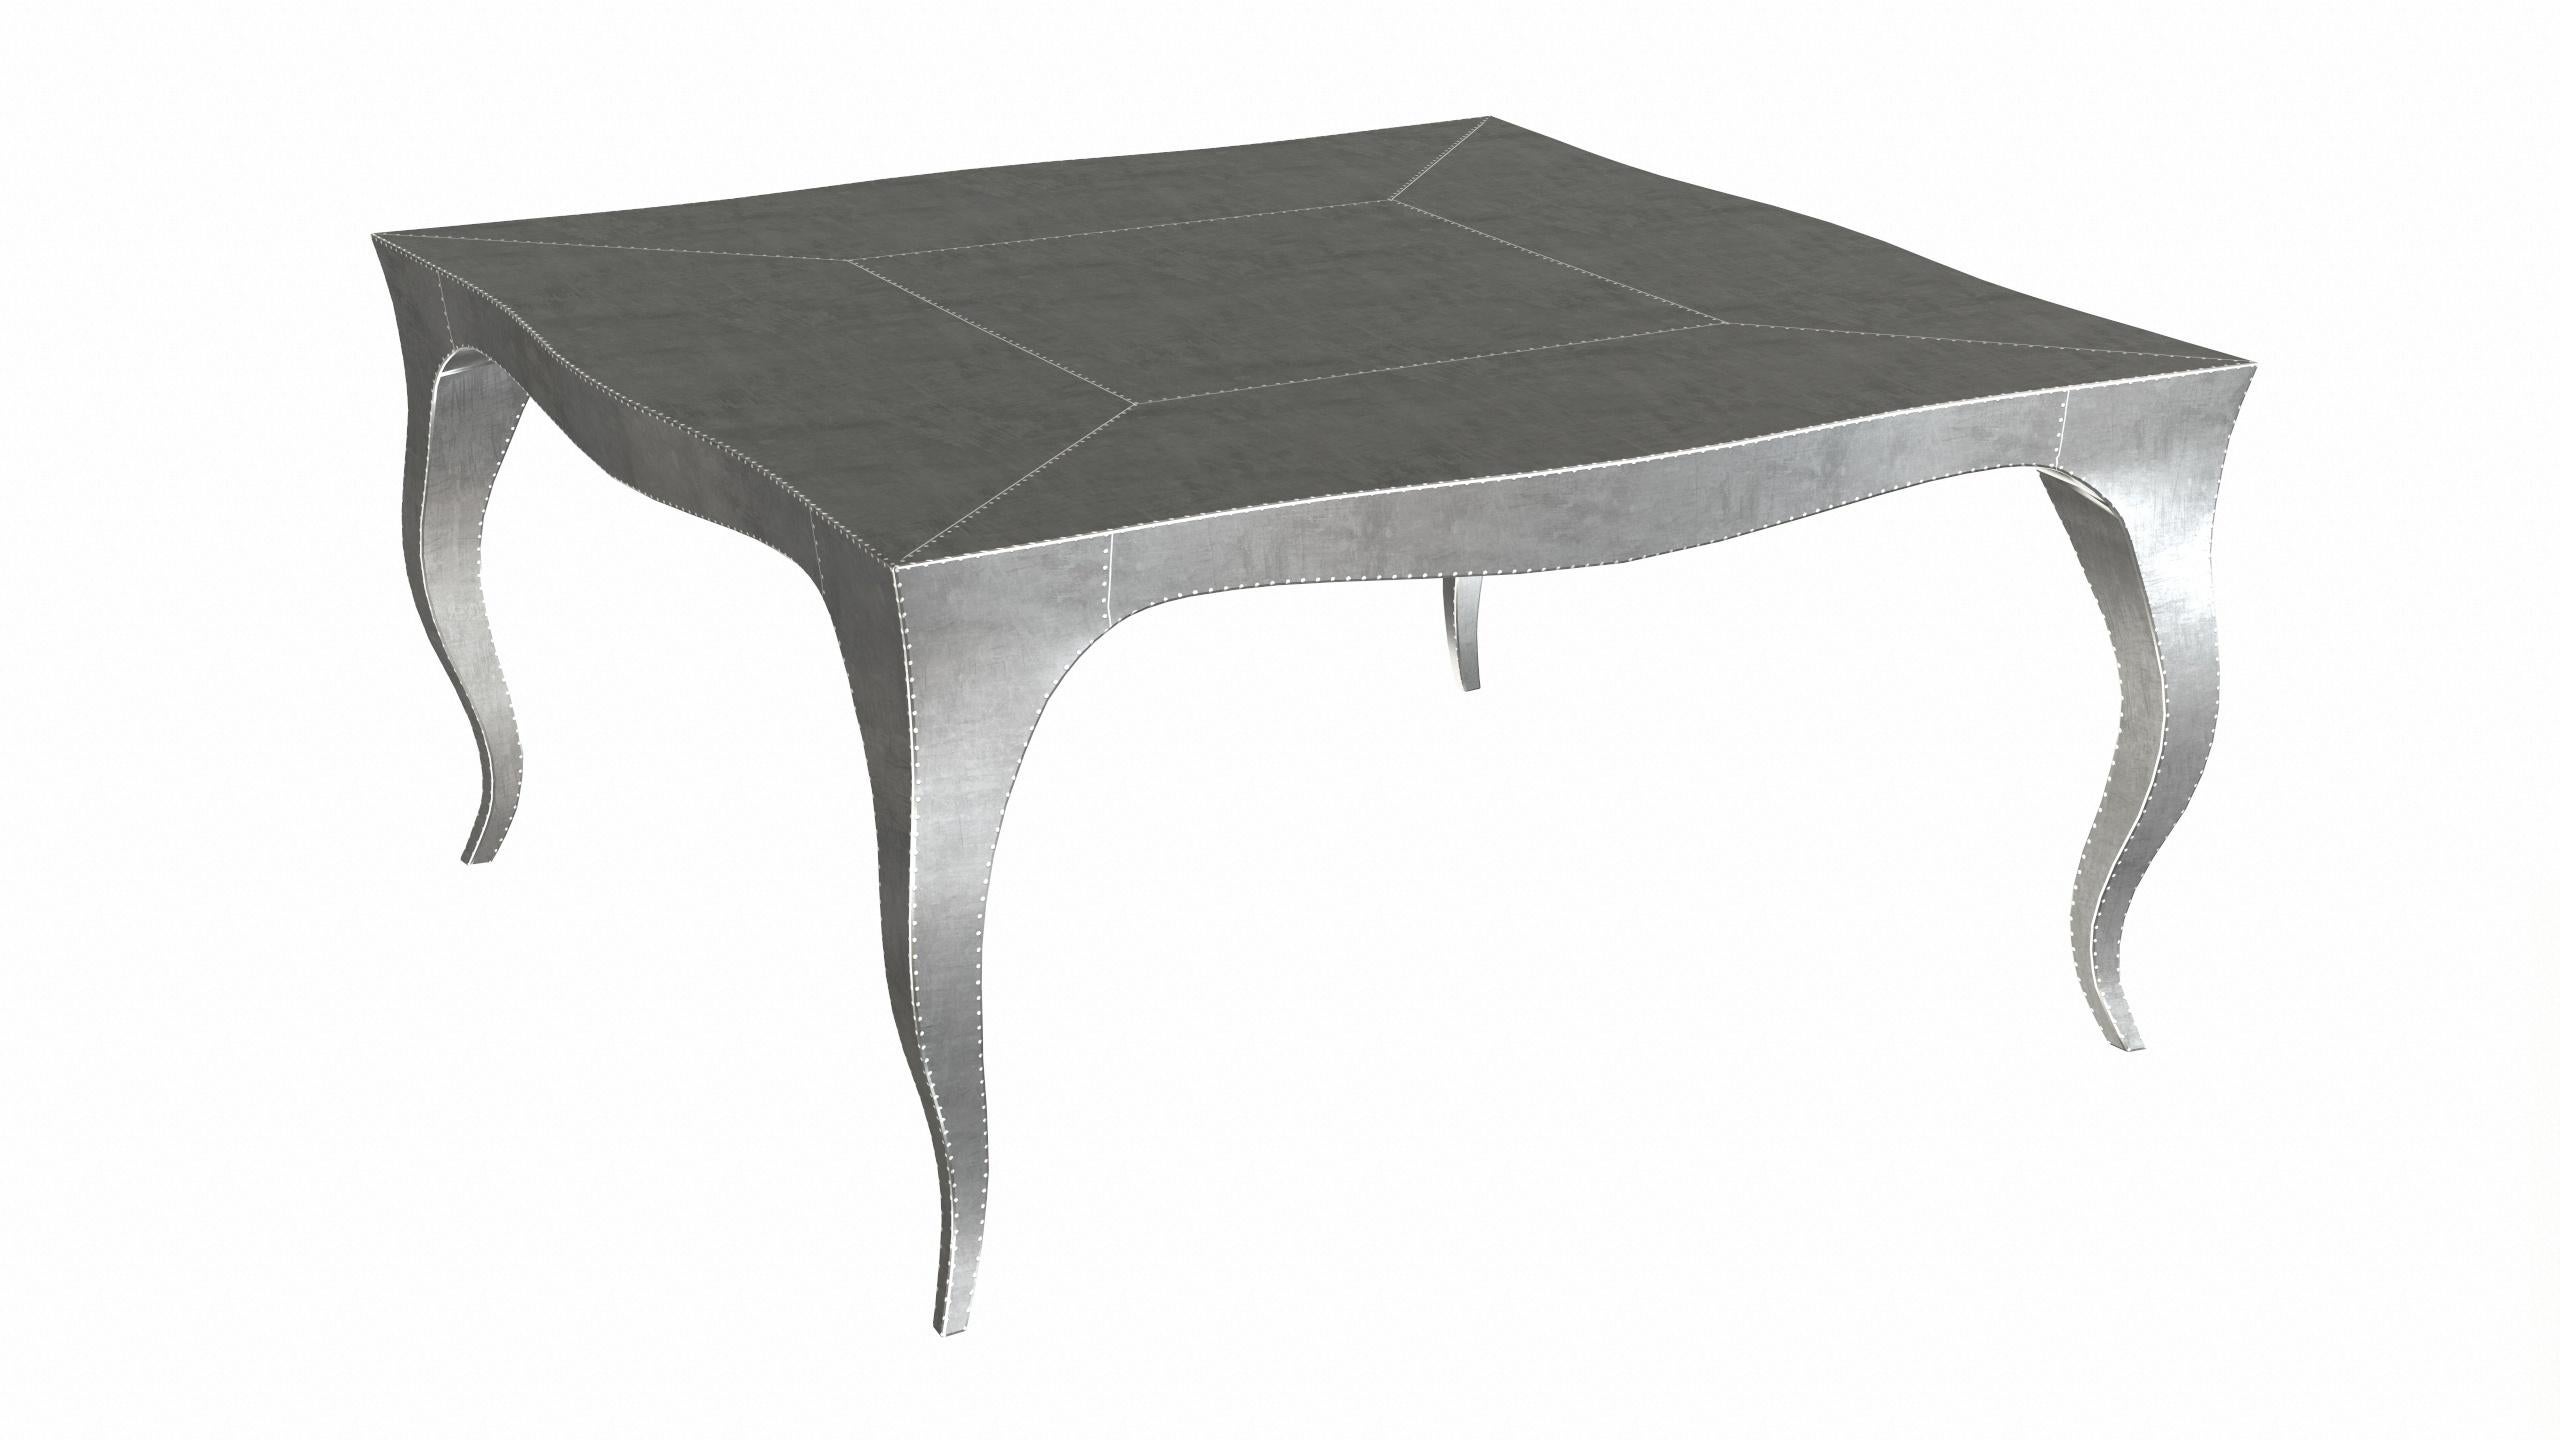 American Louise Art Deco Game Tables Smooth White Bronze by Paul Mathieu for S.Odegard For Sale